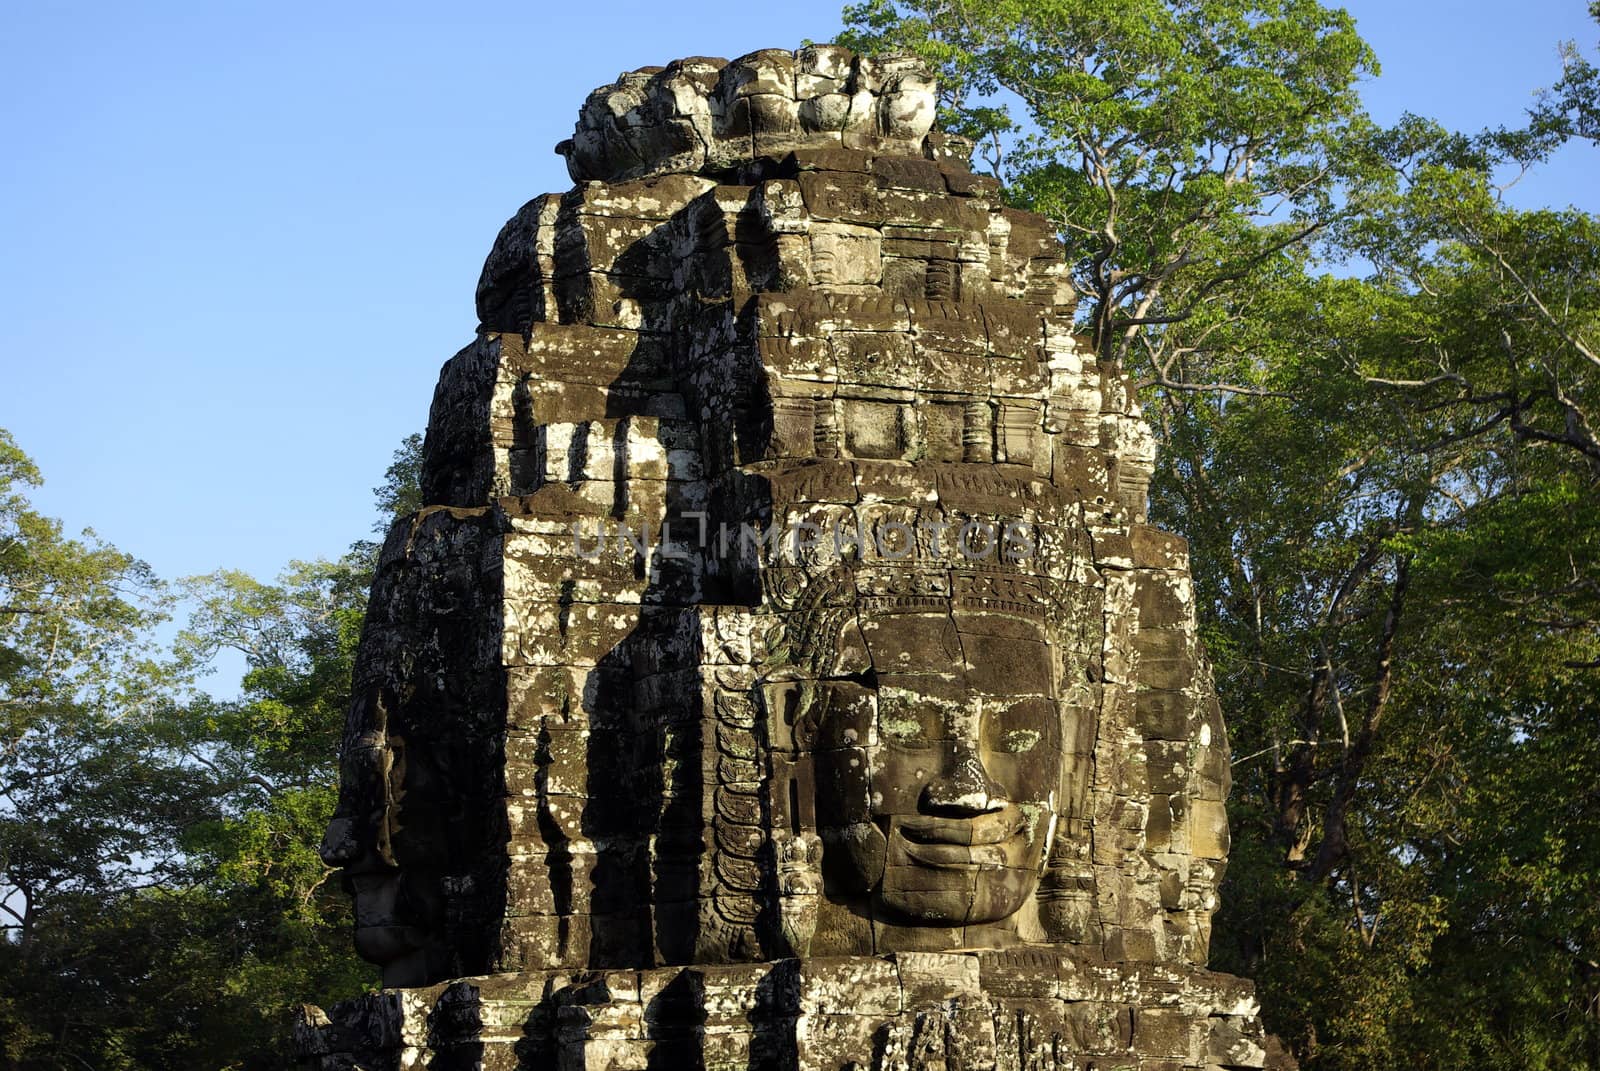 View details of a multifaceted visages tower of Bayon Temple in Angkor.